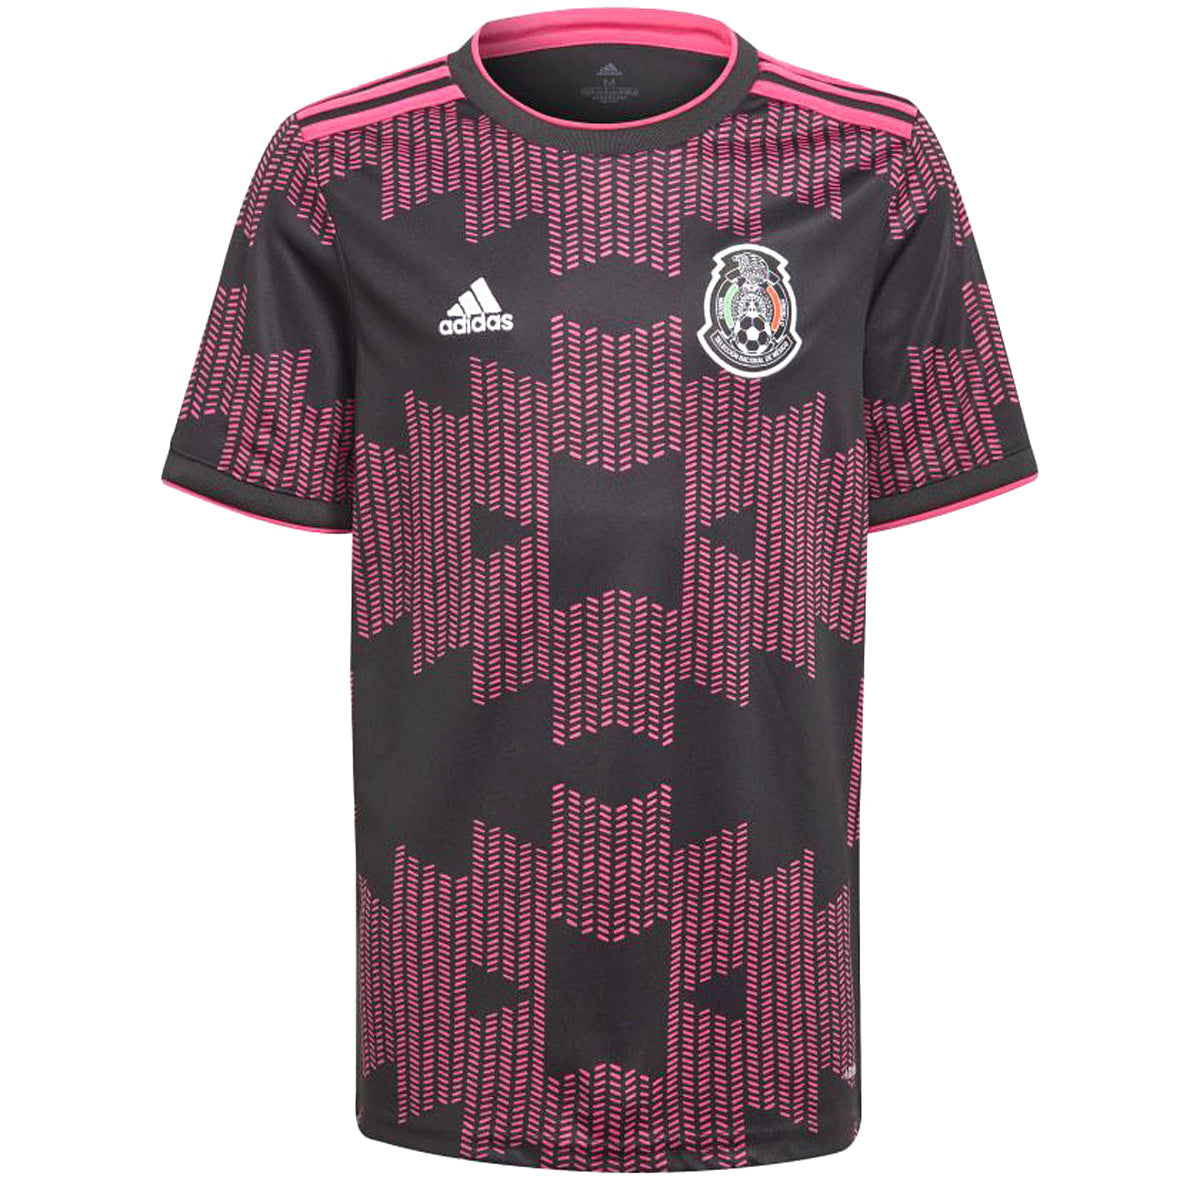 adidas Youth 2020 Mexico Home Replica Jersey | FT9646 Jersey Adidas Youth Medium White/Real Magenta 